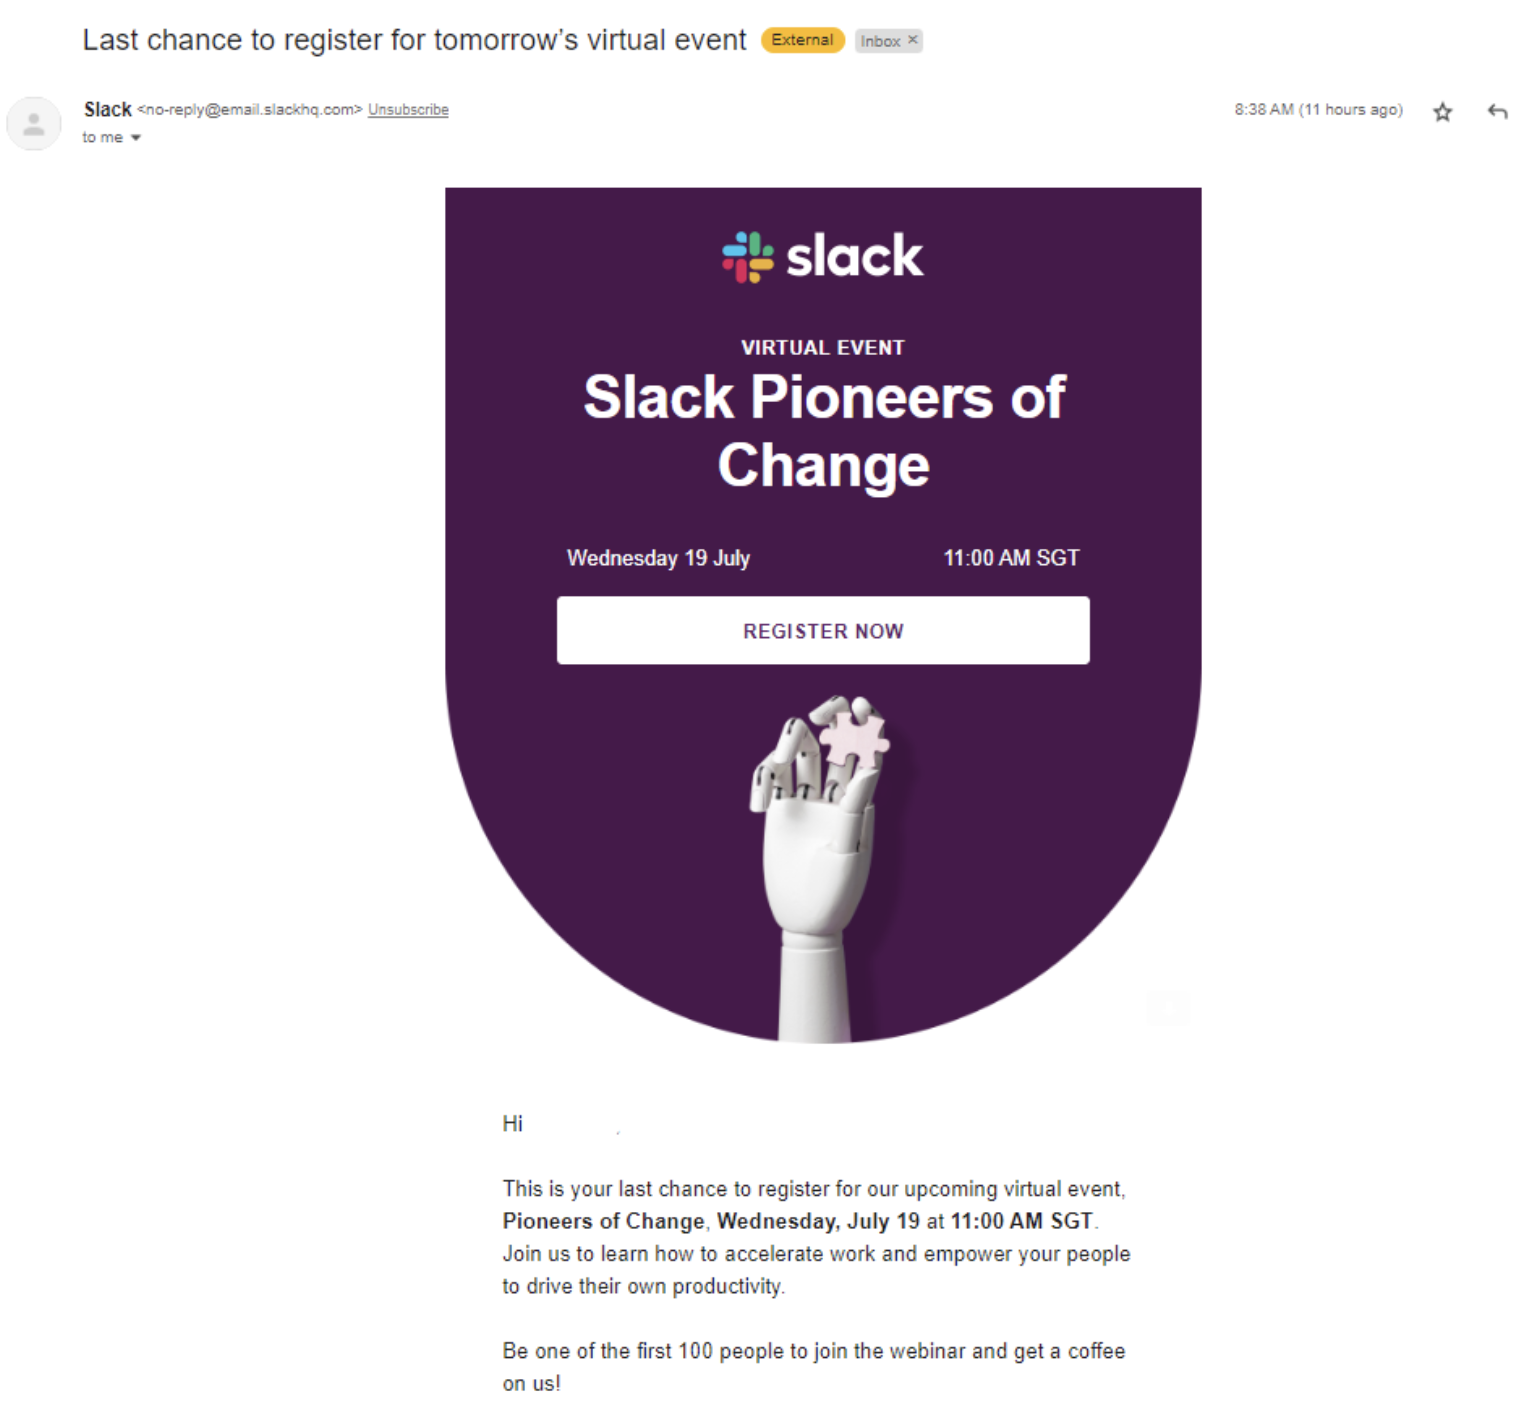 Slack b2b email marketing example for Slack Pioneers of Change event 